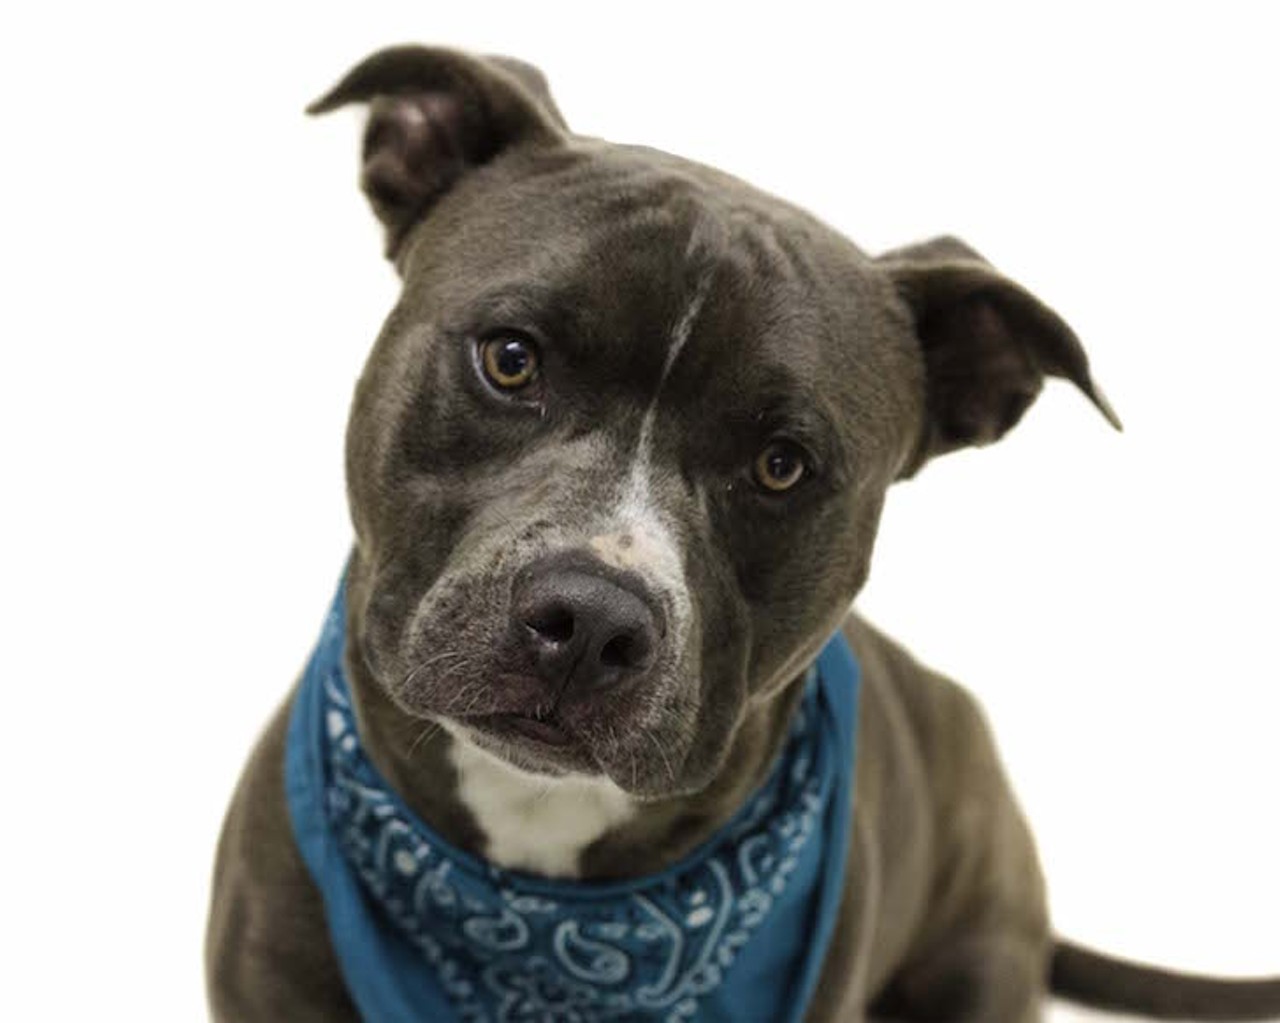 17 adoptable pooches looking for a new human